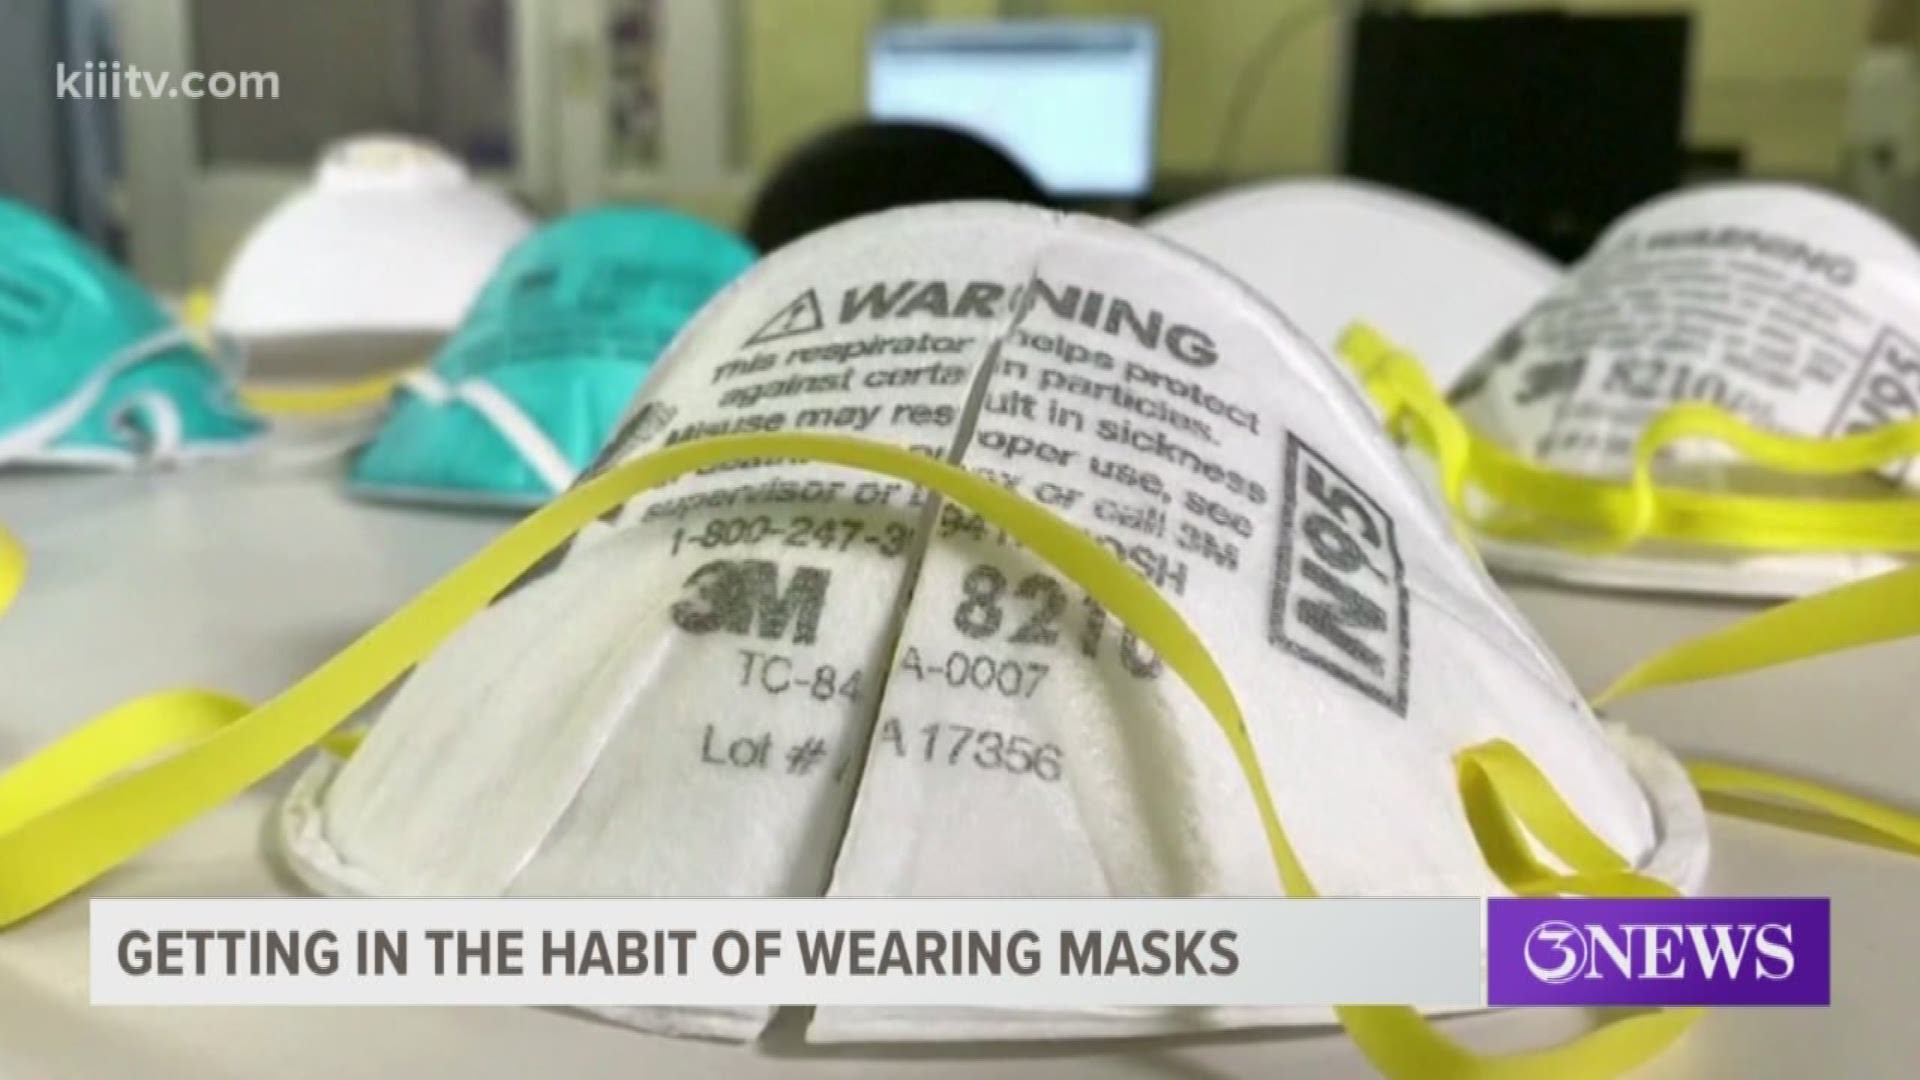 The CDC has recommended that everyone wear protective masks when out.